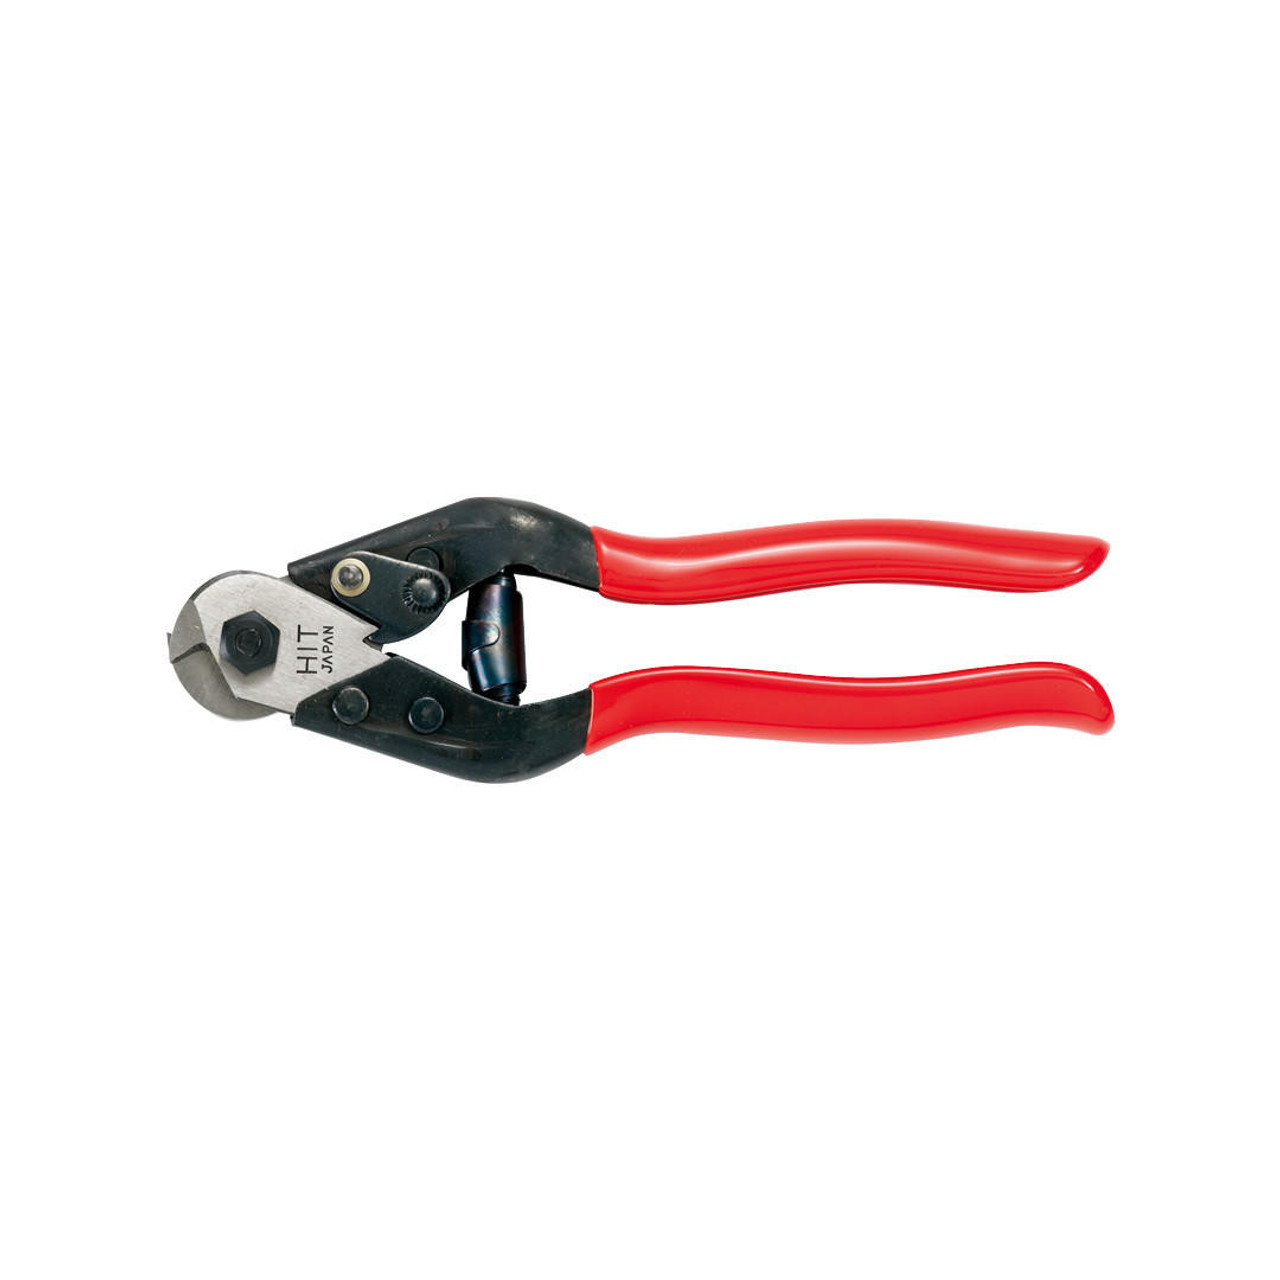 HIT Professional Tools HAND WIRE ROPE CUTTER 6MM -HITHWC06